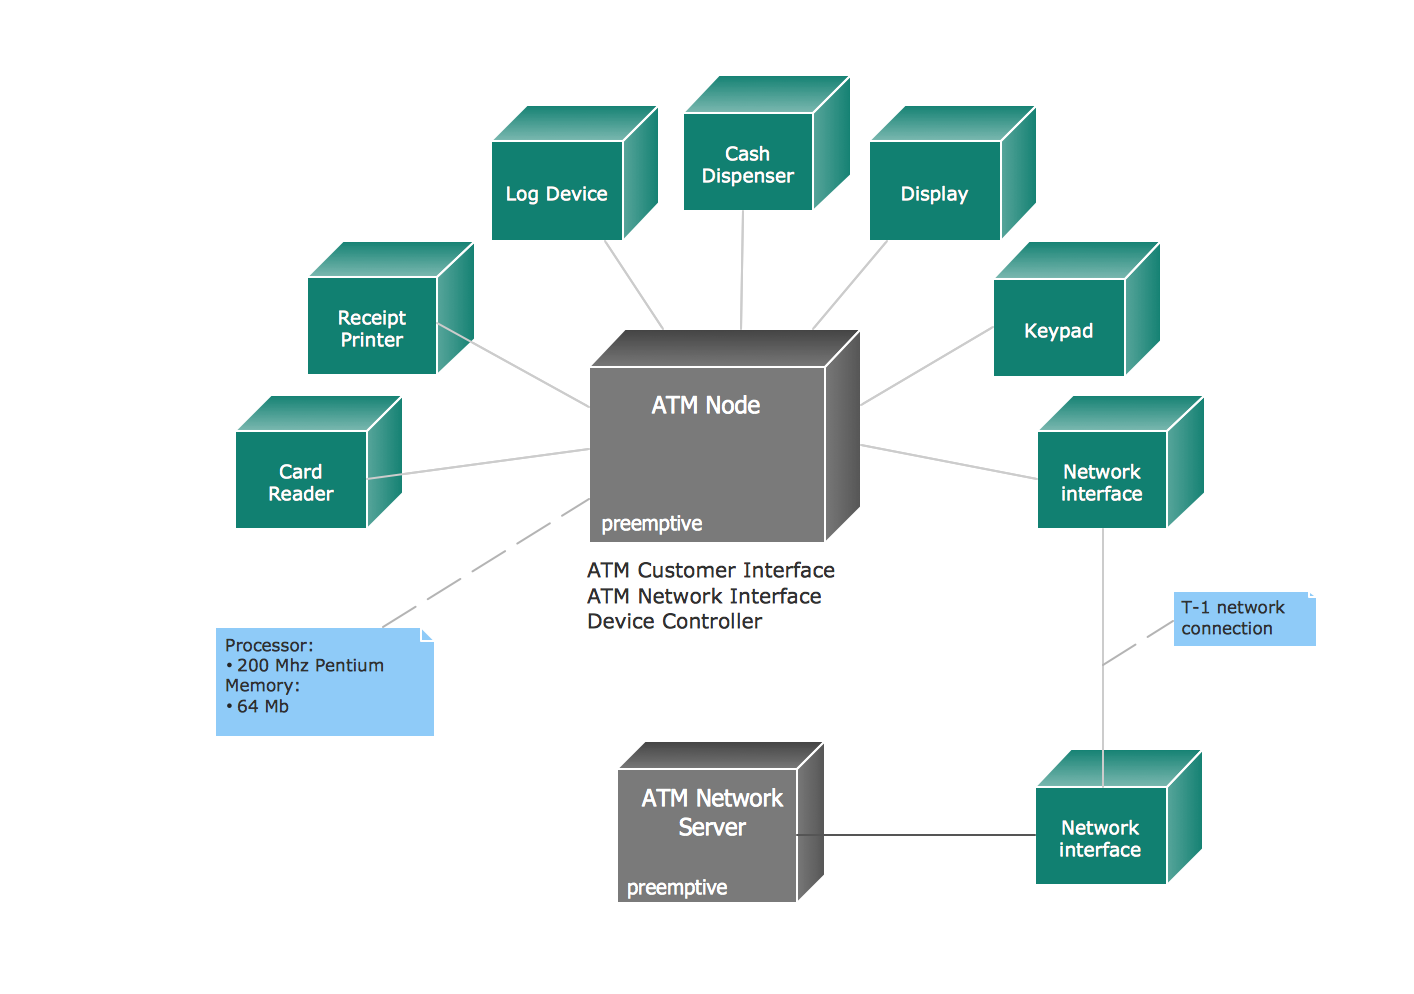 use case diagram for online banking